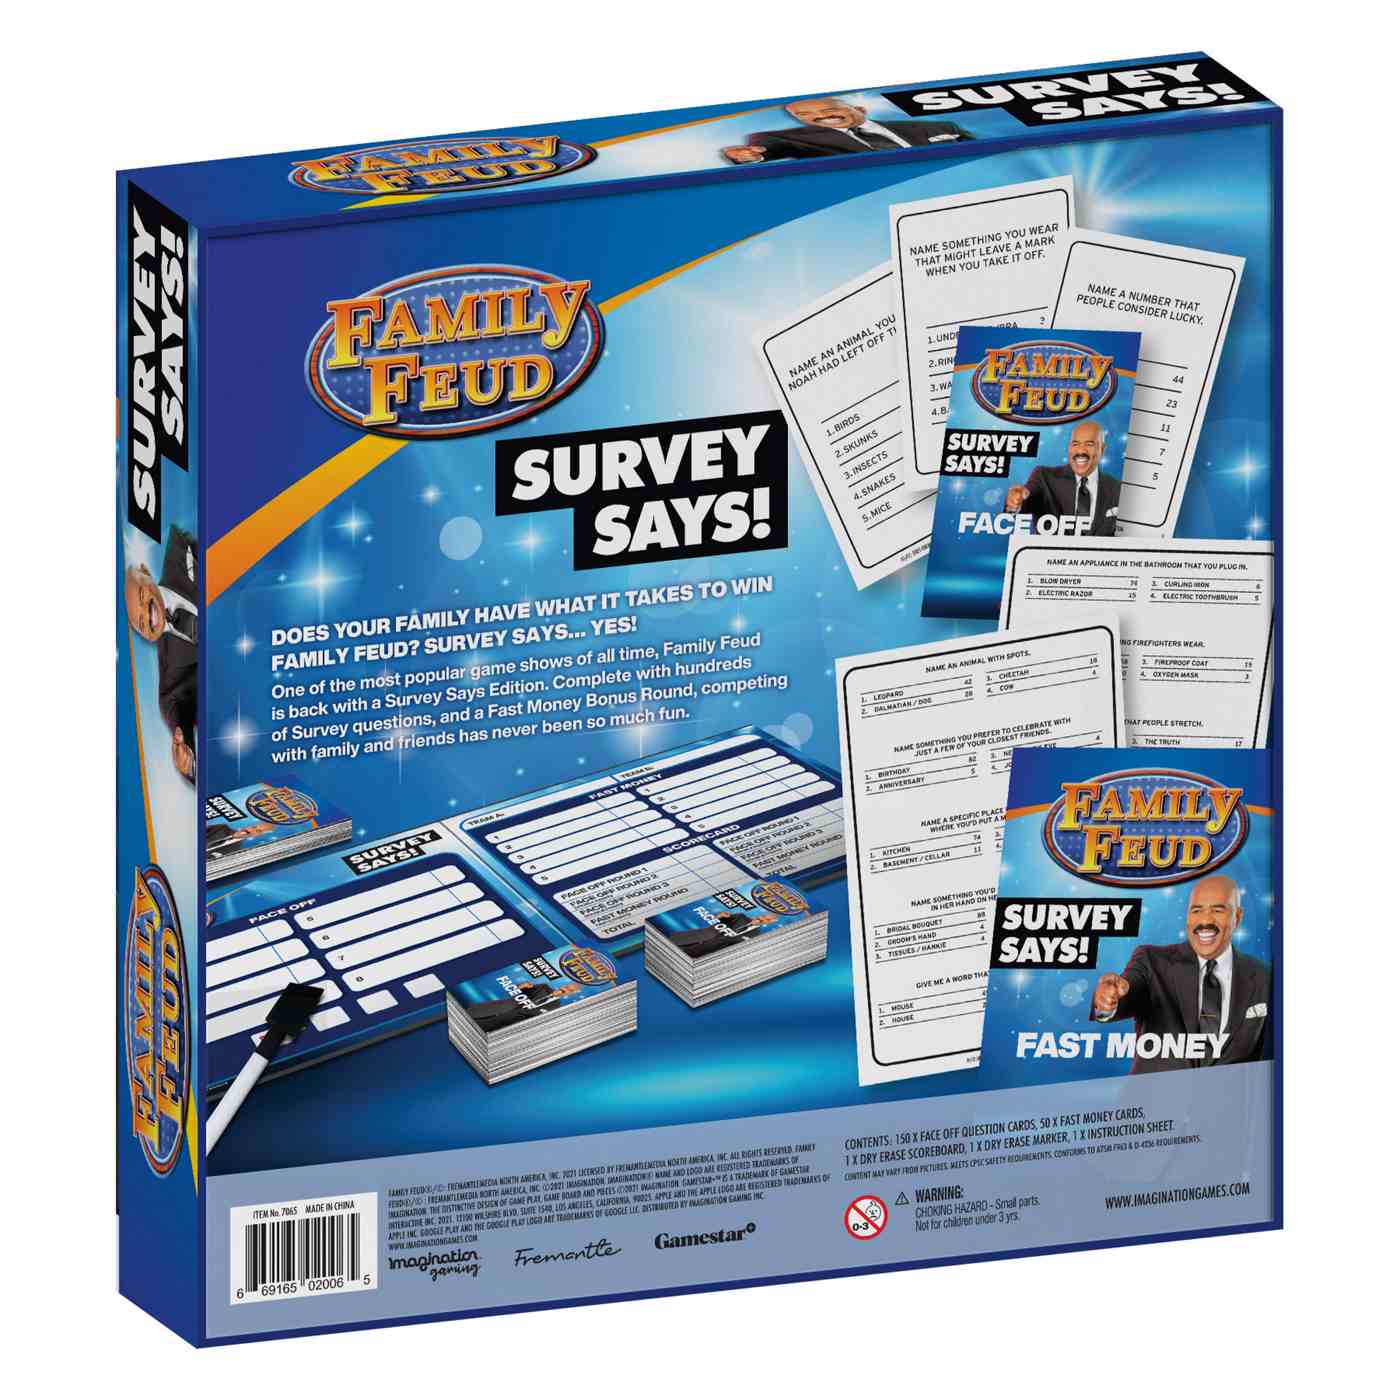 Family Feud Survey Says! Edition Game; image 2 of 4